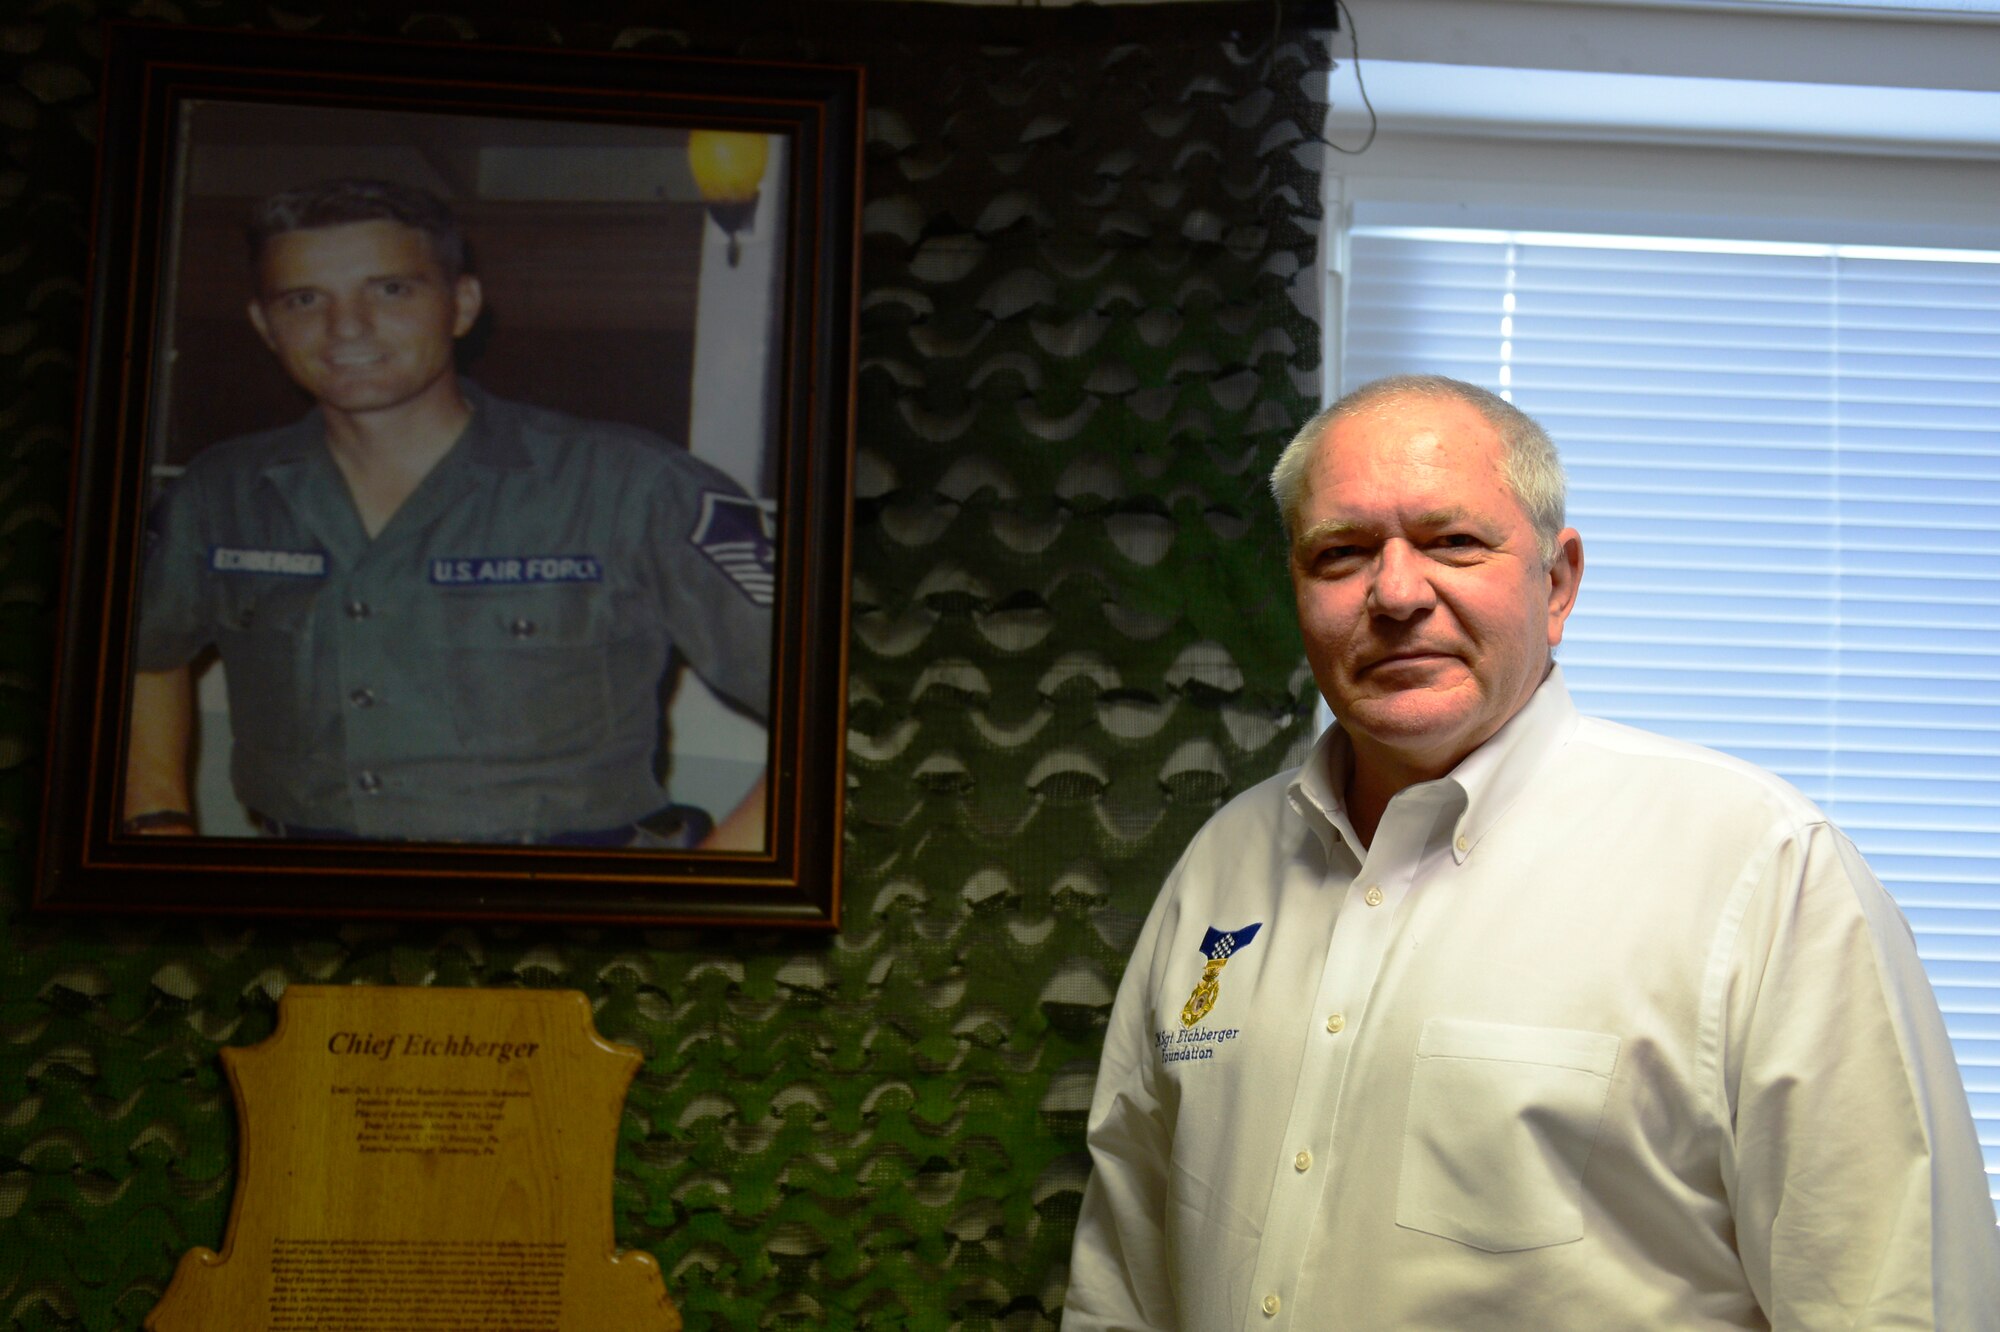 Etchberger recently started a foundation in honor of his father, which helps support families of Airmen.